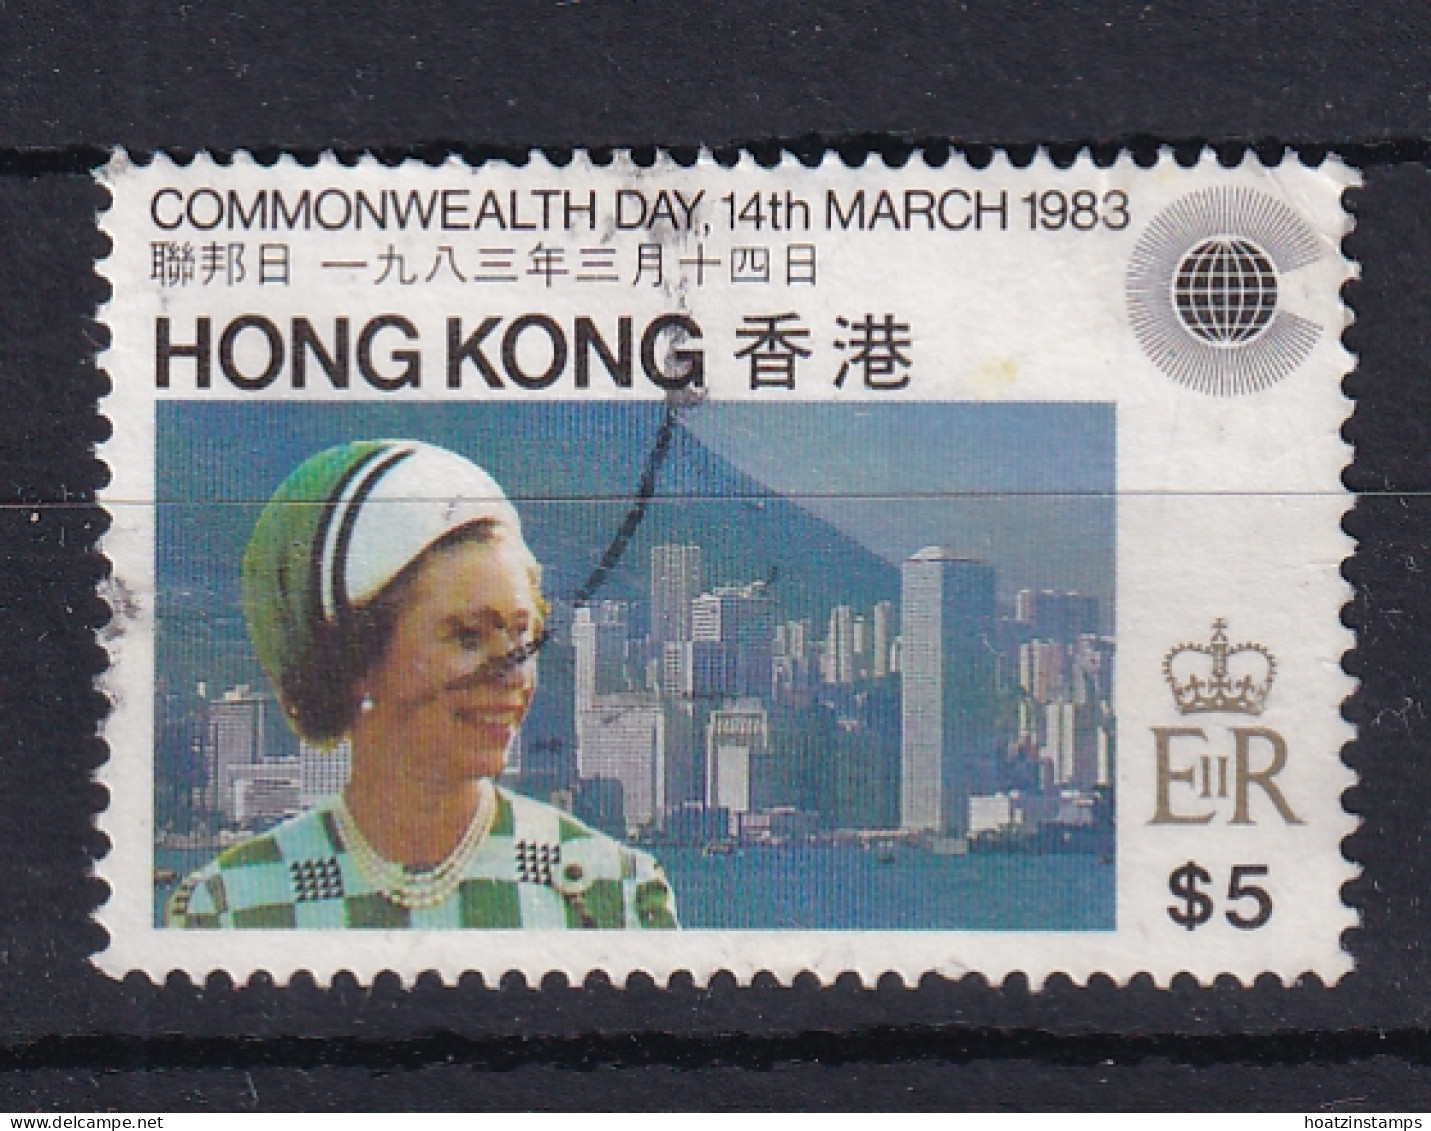 Hong Kong: 1983   Commonwealth Day     SG441      $5    Used - Used Stamps